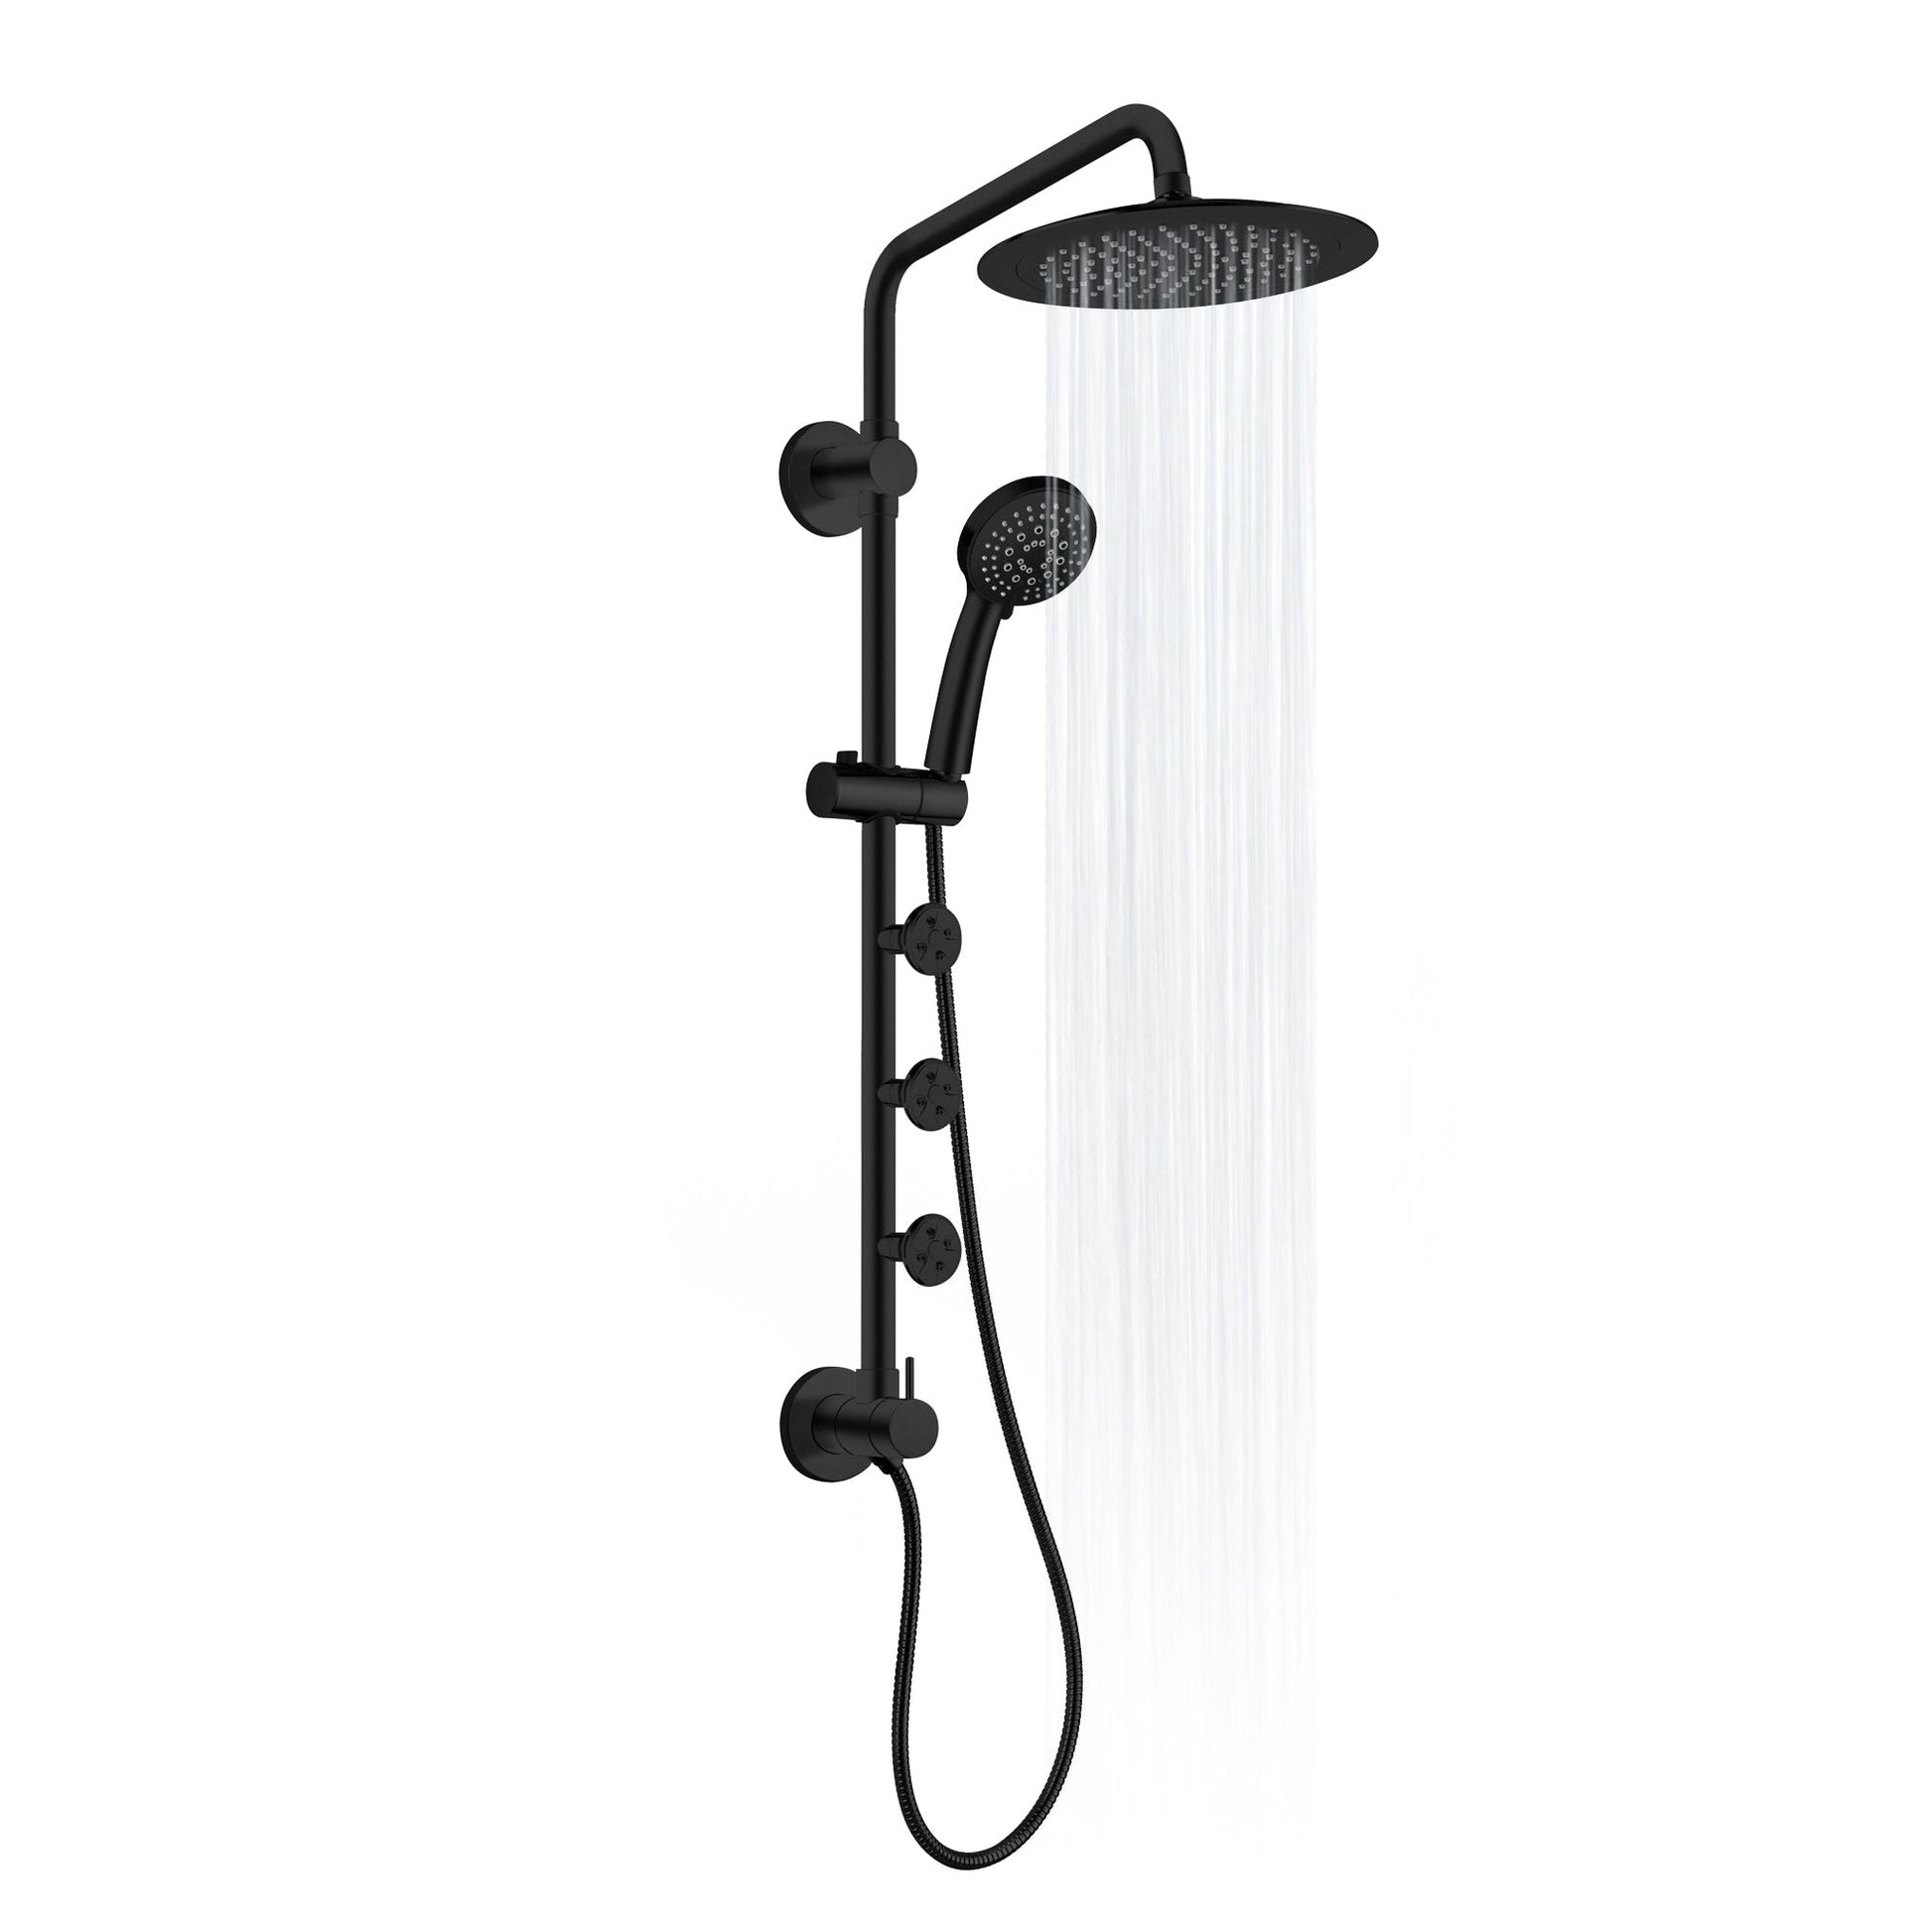 PULSE ShowerSpas Lanai 1.8 GPM Rain Shower System in Matte Black With 3-Power Spray Body Jet and 3-Function Hand Shower